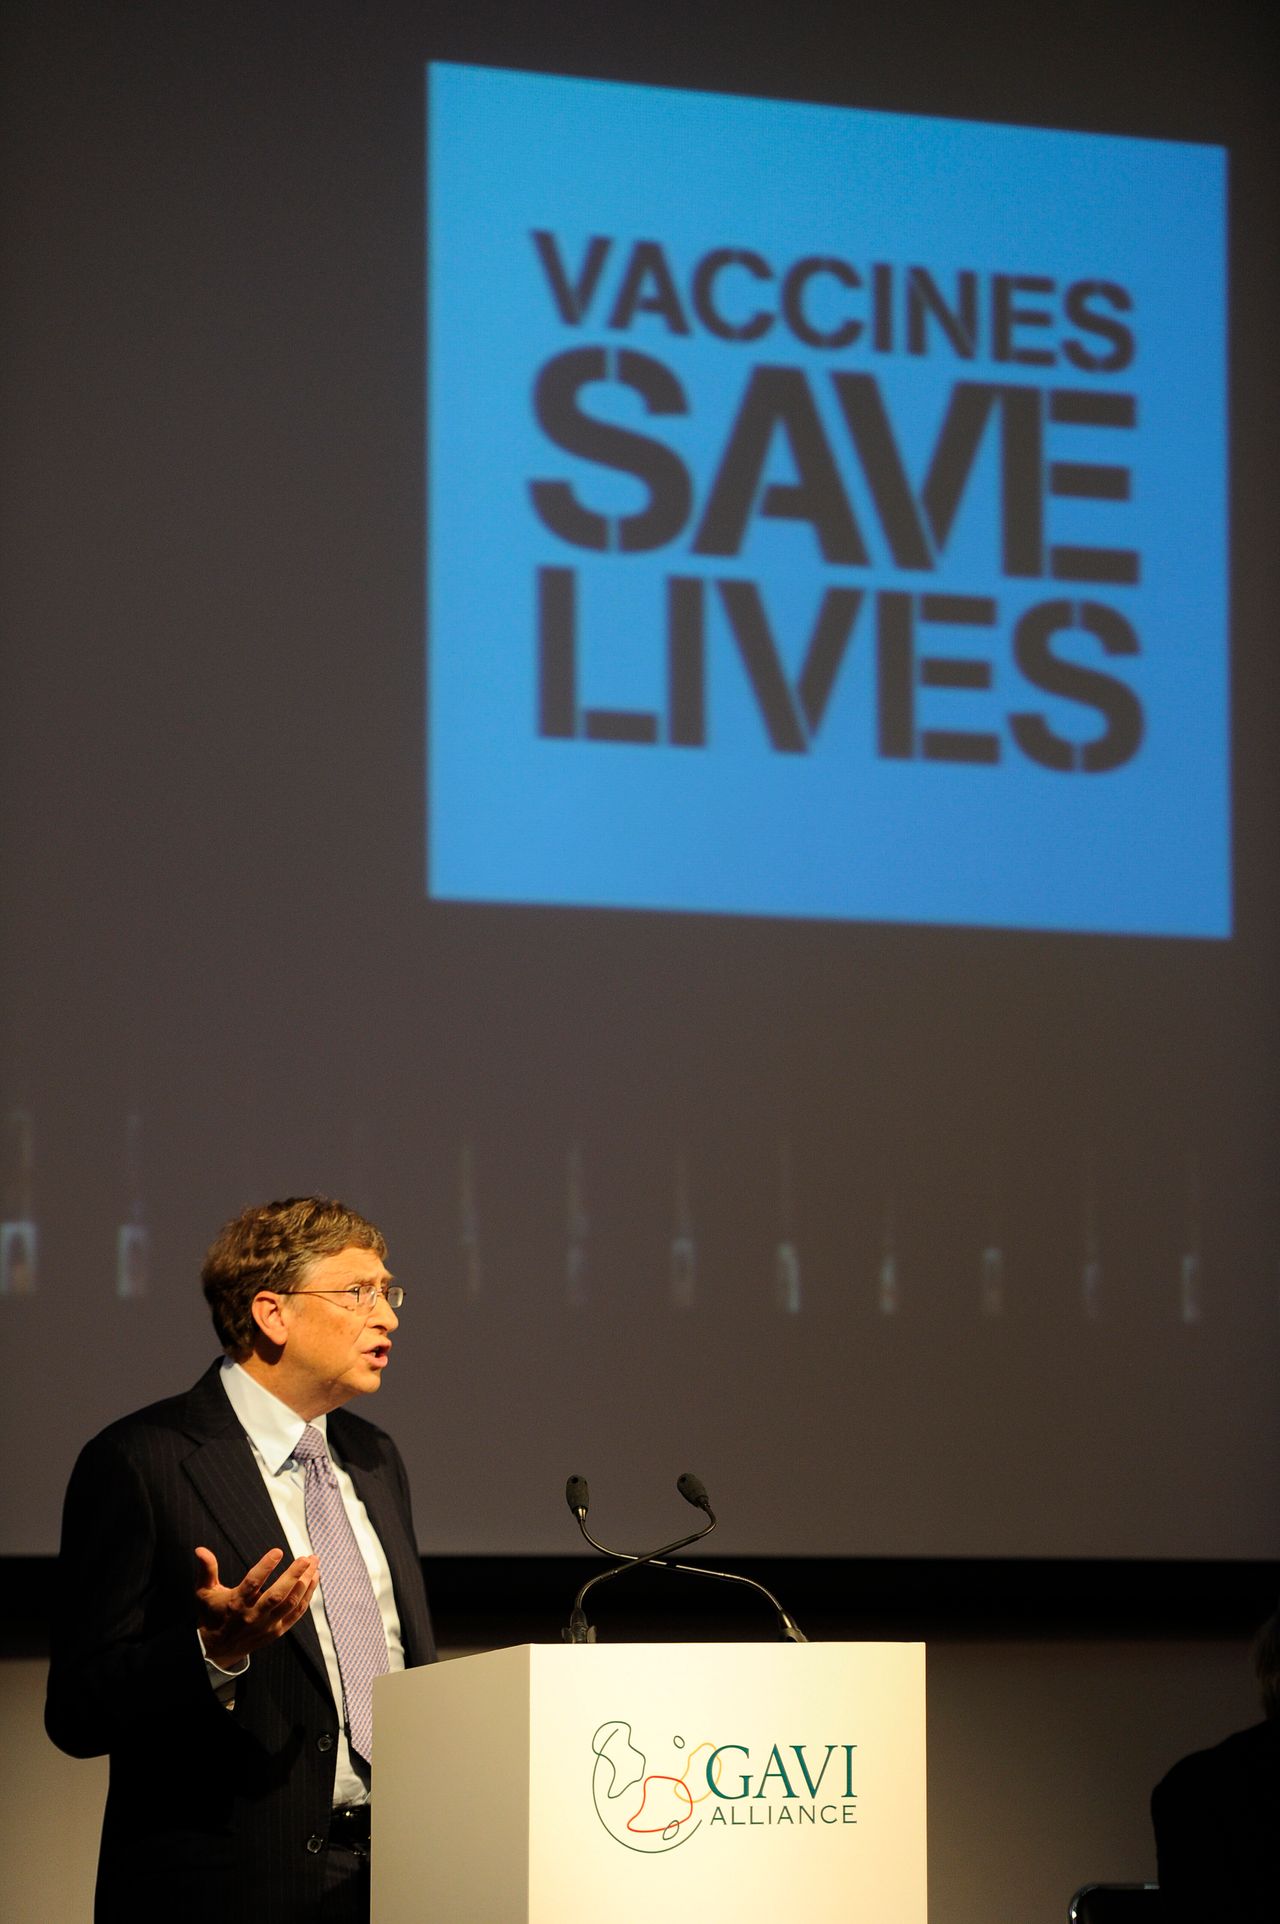 Gates speaking to the Gavi Alliance, a public-private partnership to increase immunization in the world's poorest countries.